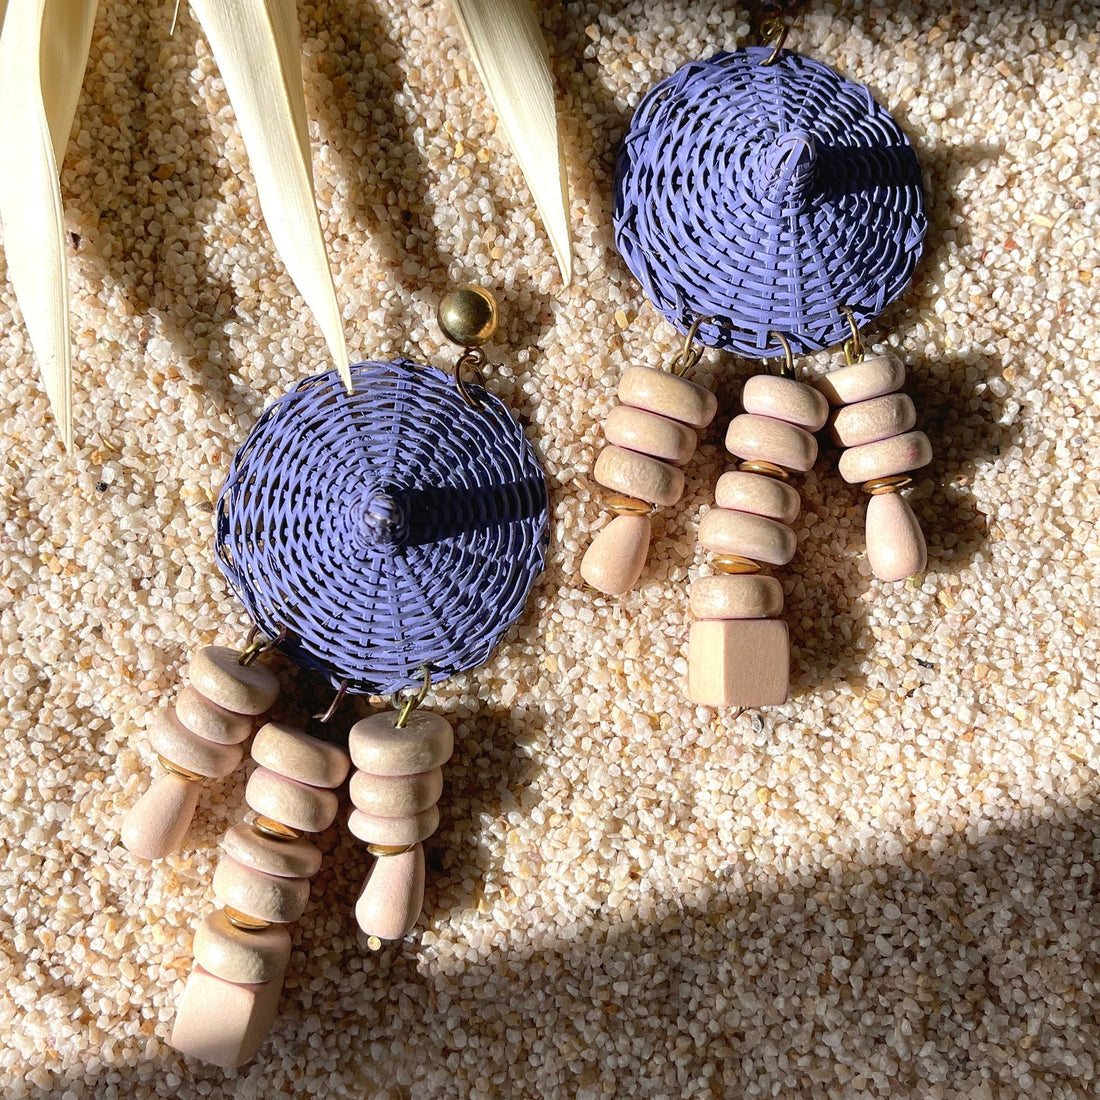 A pair of vintage costume jewelry wicker woven basket earrings with wooden bead dangles shown on sand